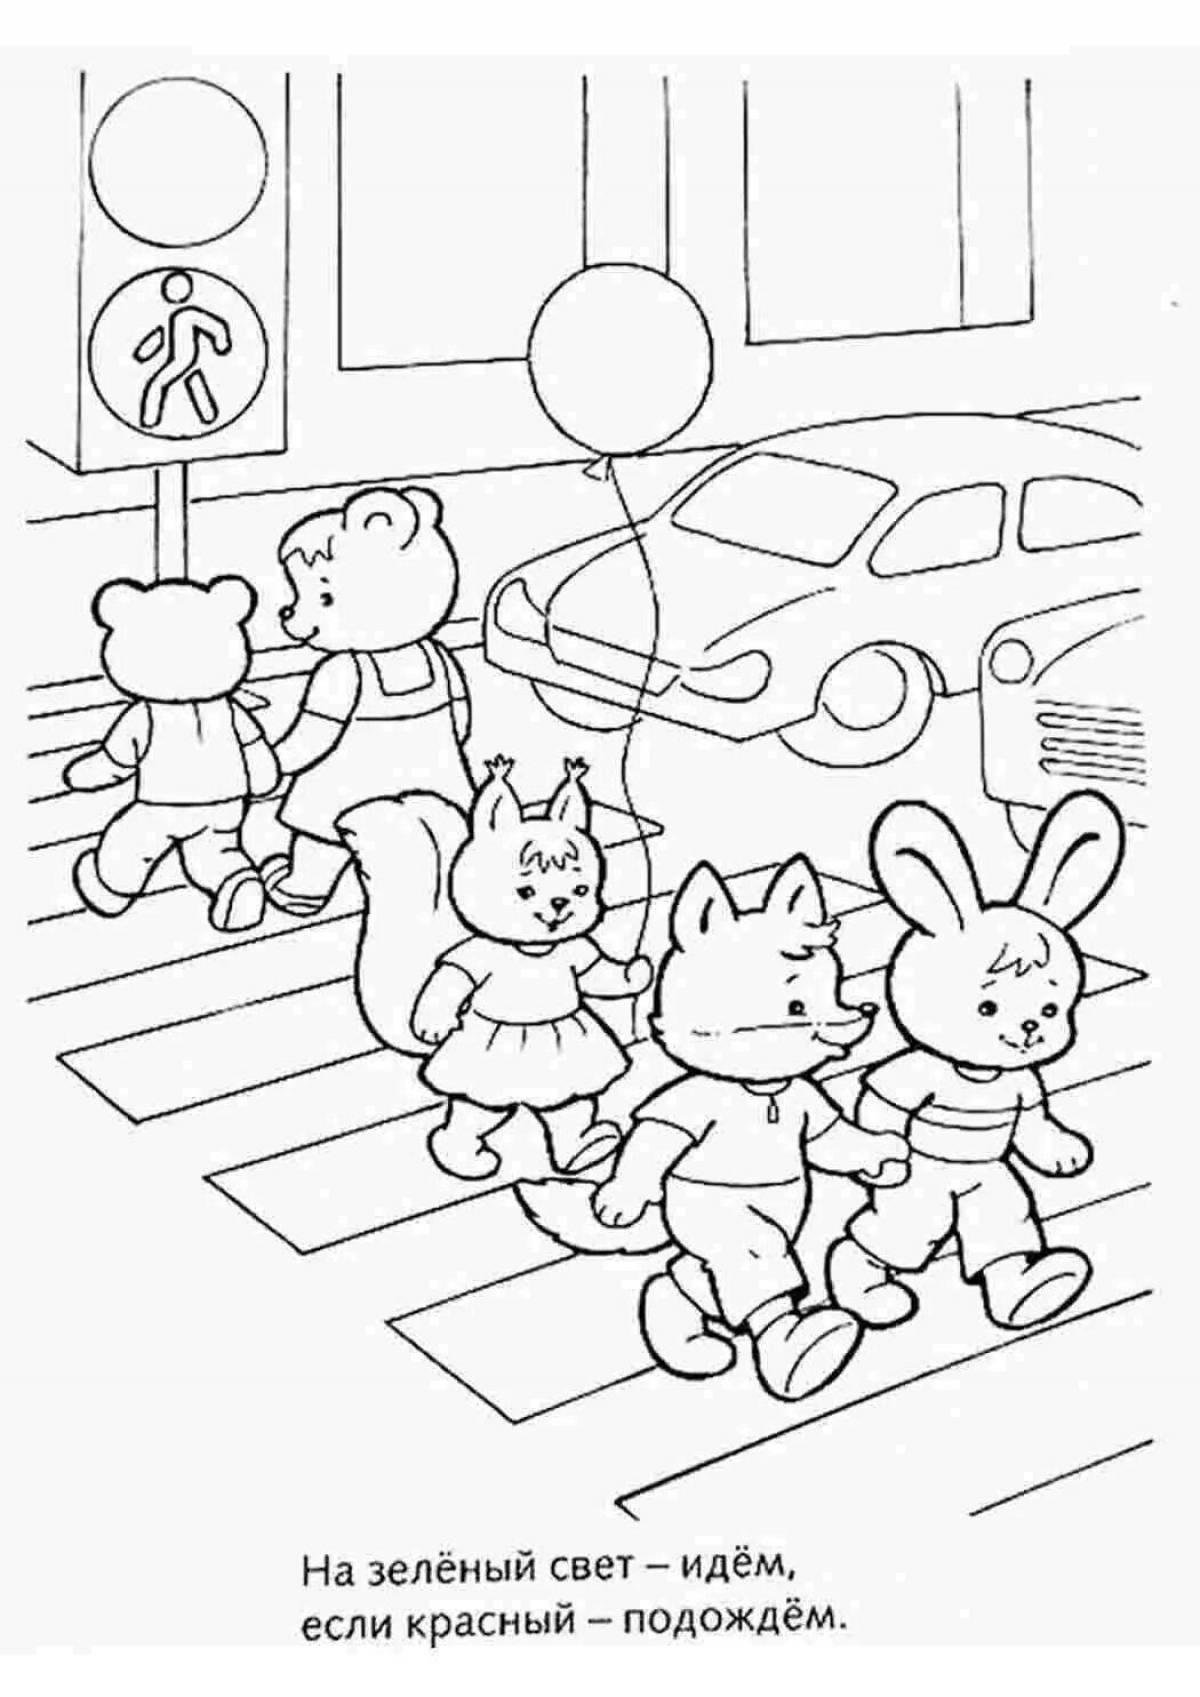 Drawings for kids traffic rules for kids #18